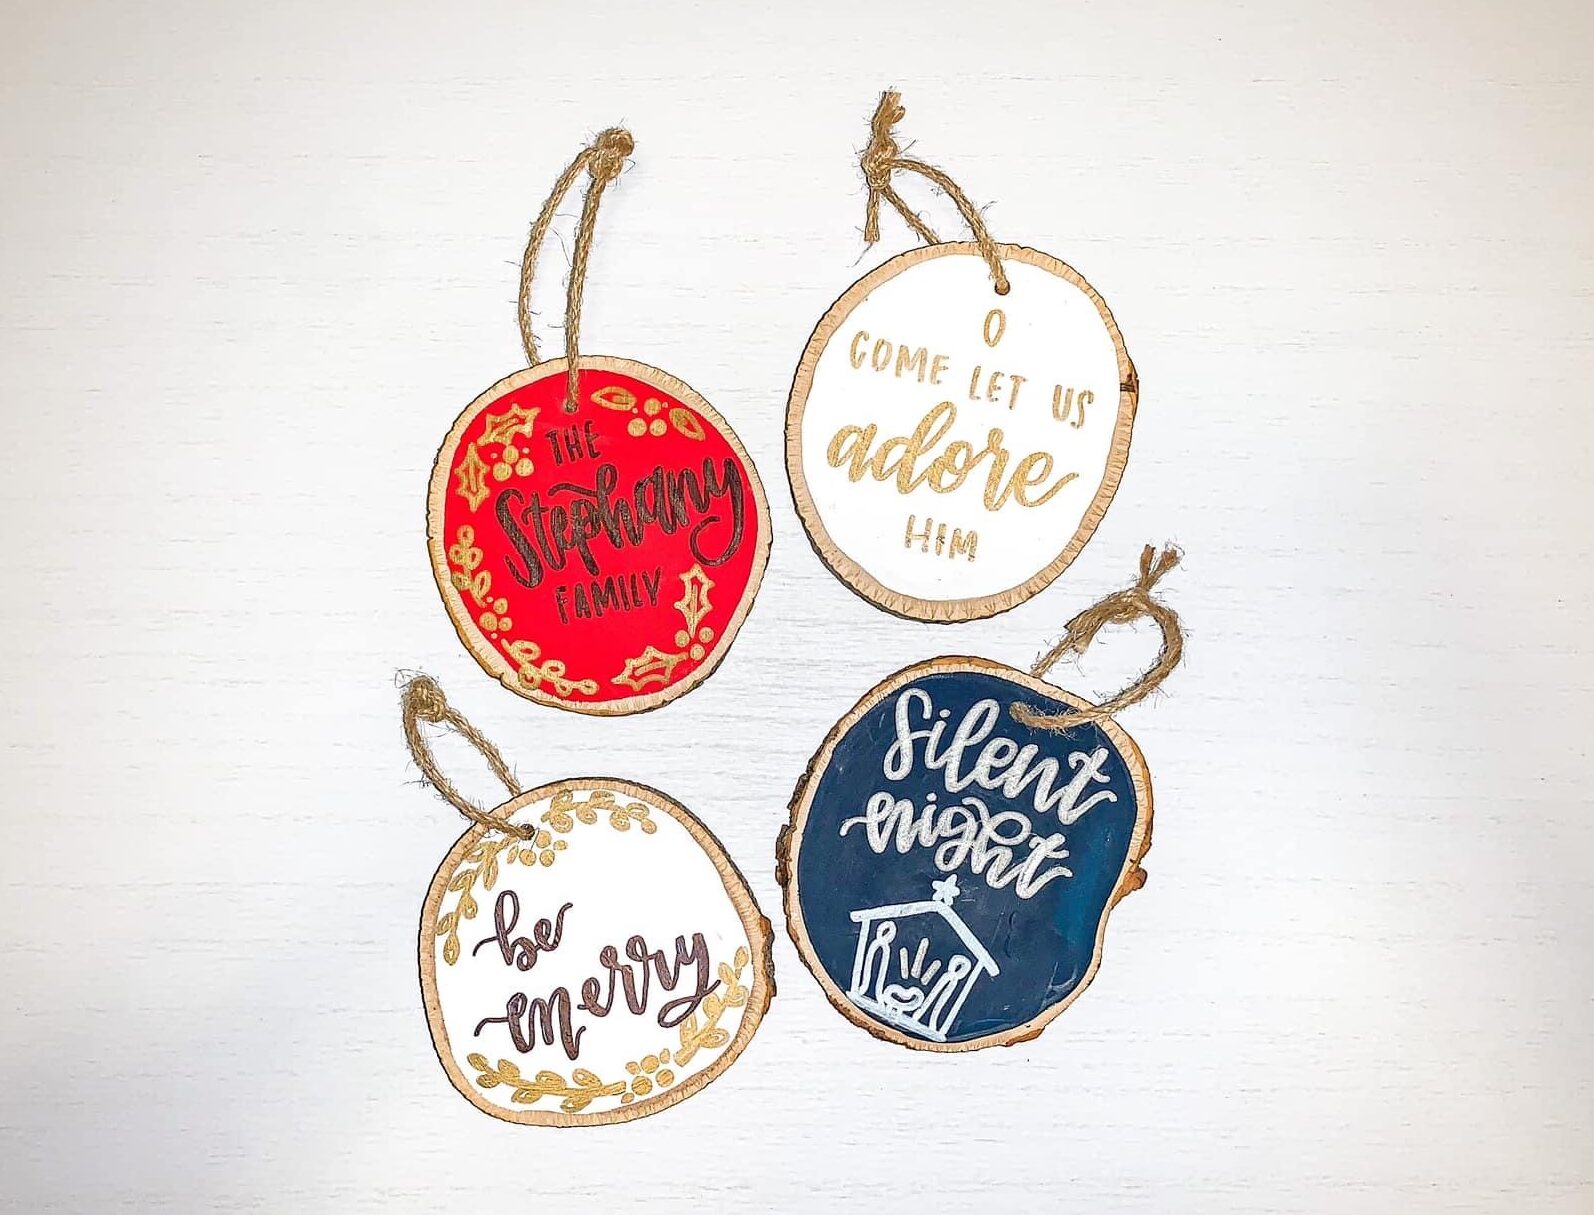 Handmade Christmas Ornaments with Calligraphy